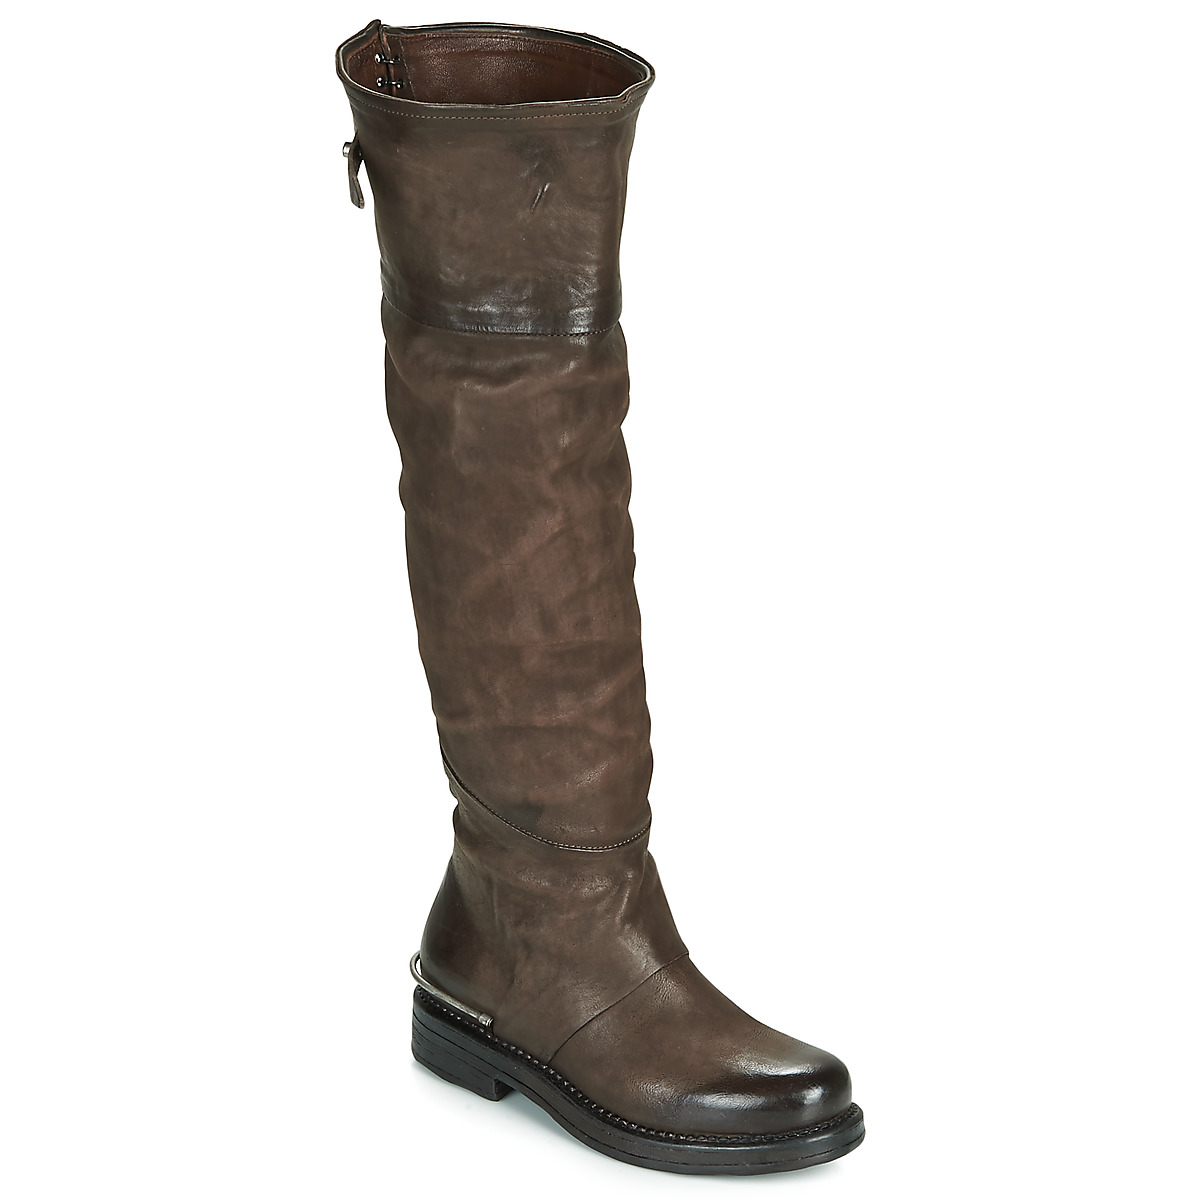 airstep / a.s.98  bret high  women's high boots in brown